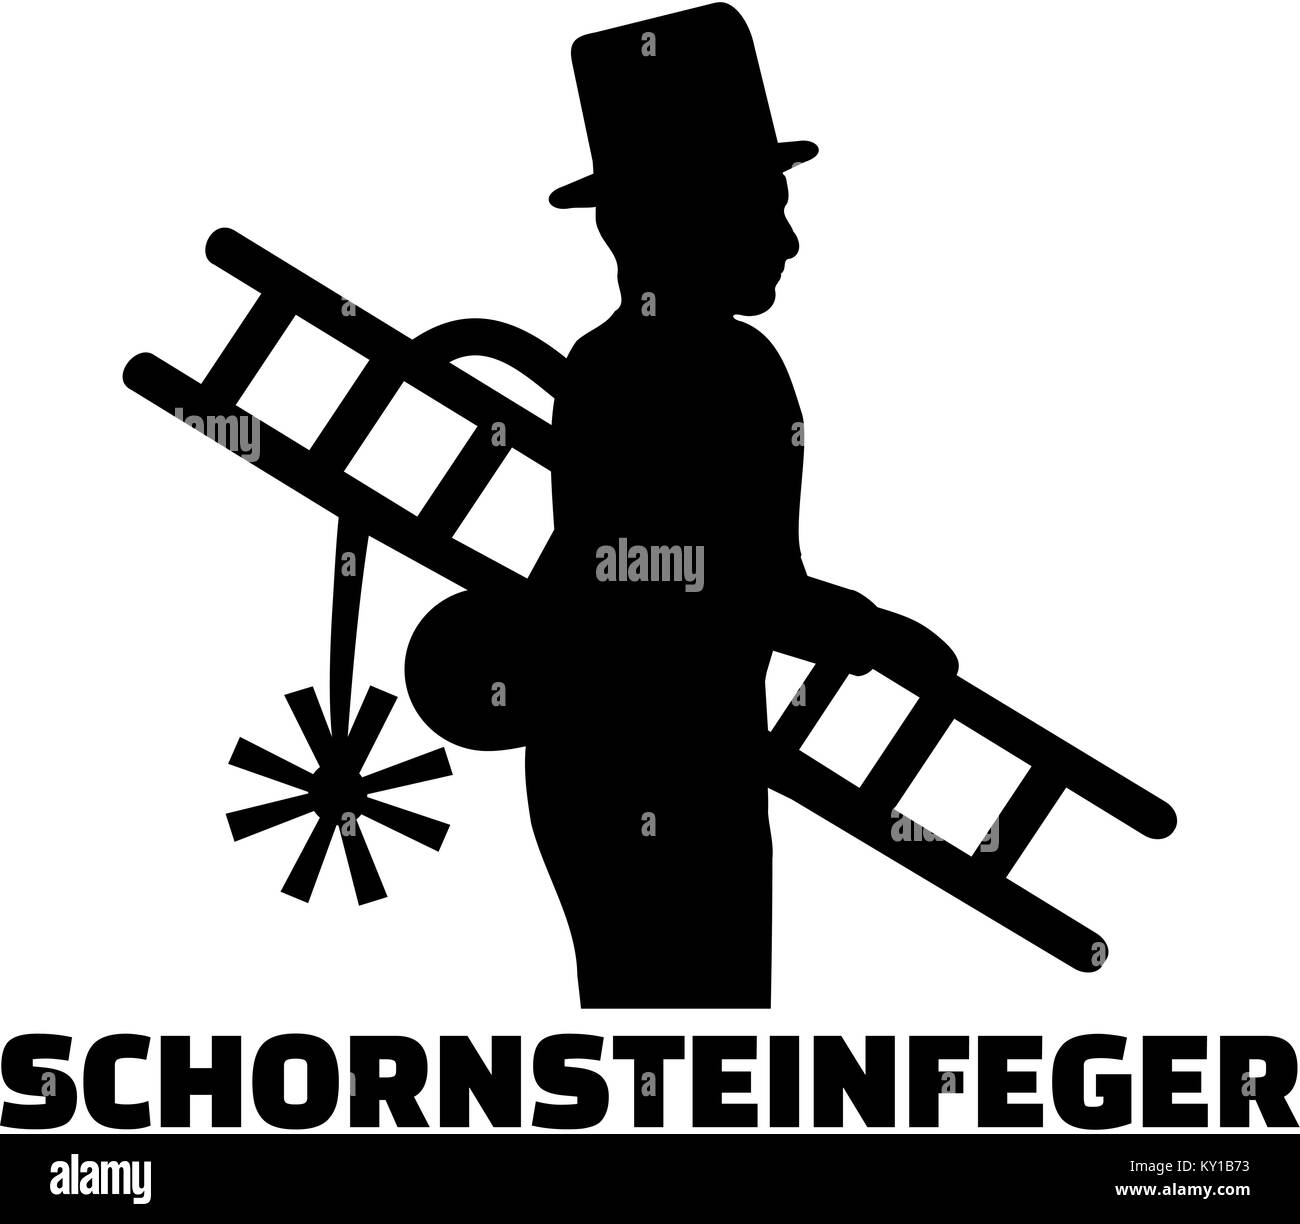 Chimney sweeper with german job title Stock Photo